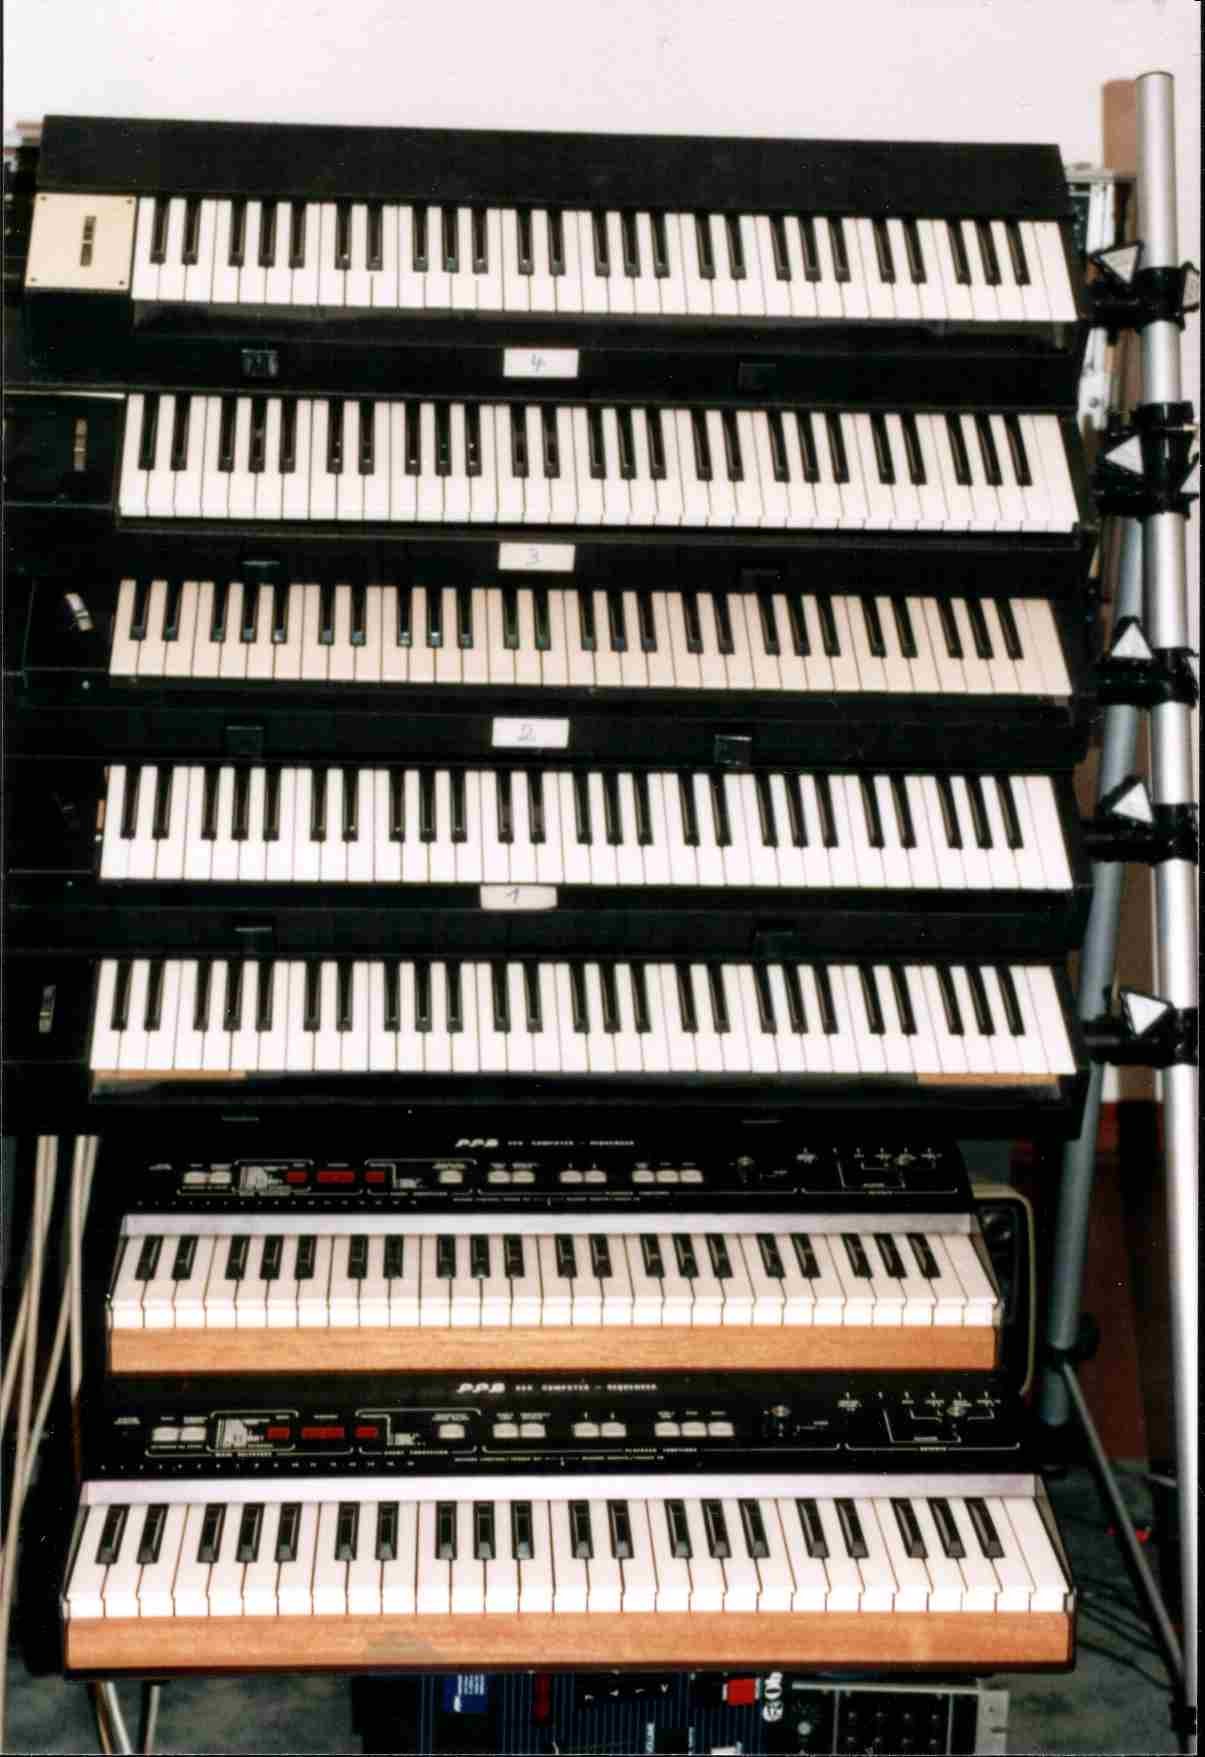 And the keyboards to go with it courtesy of BKS (Bass Konzept Studios)